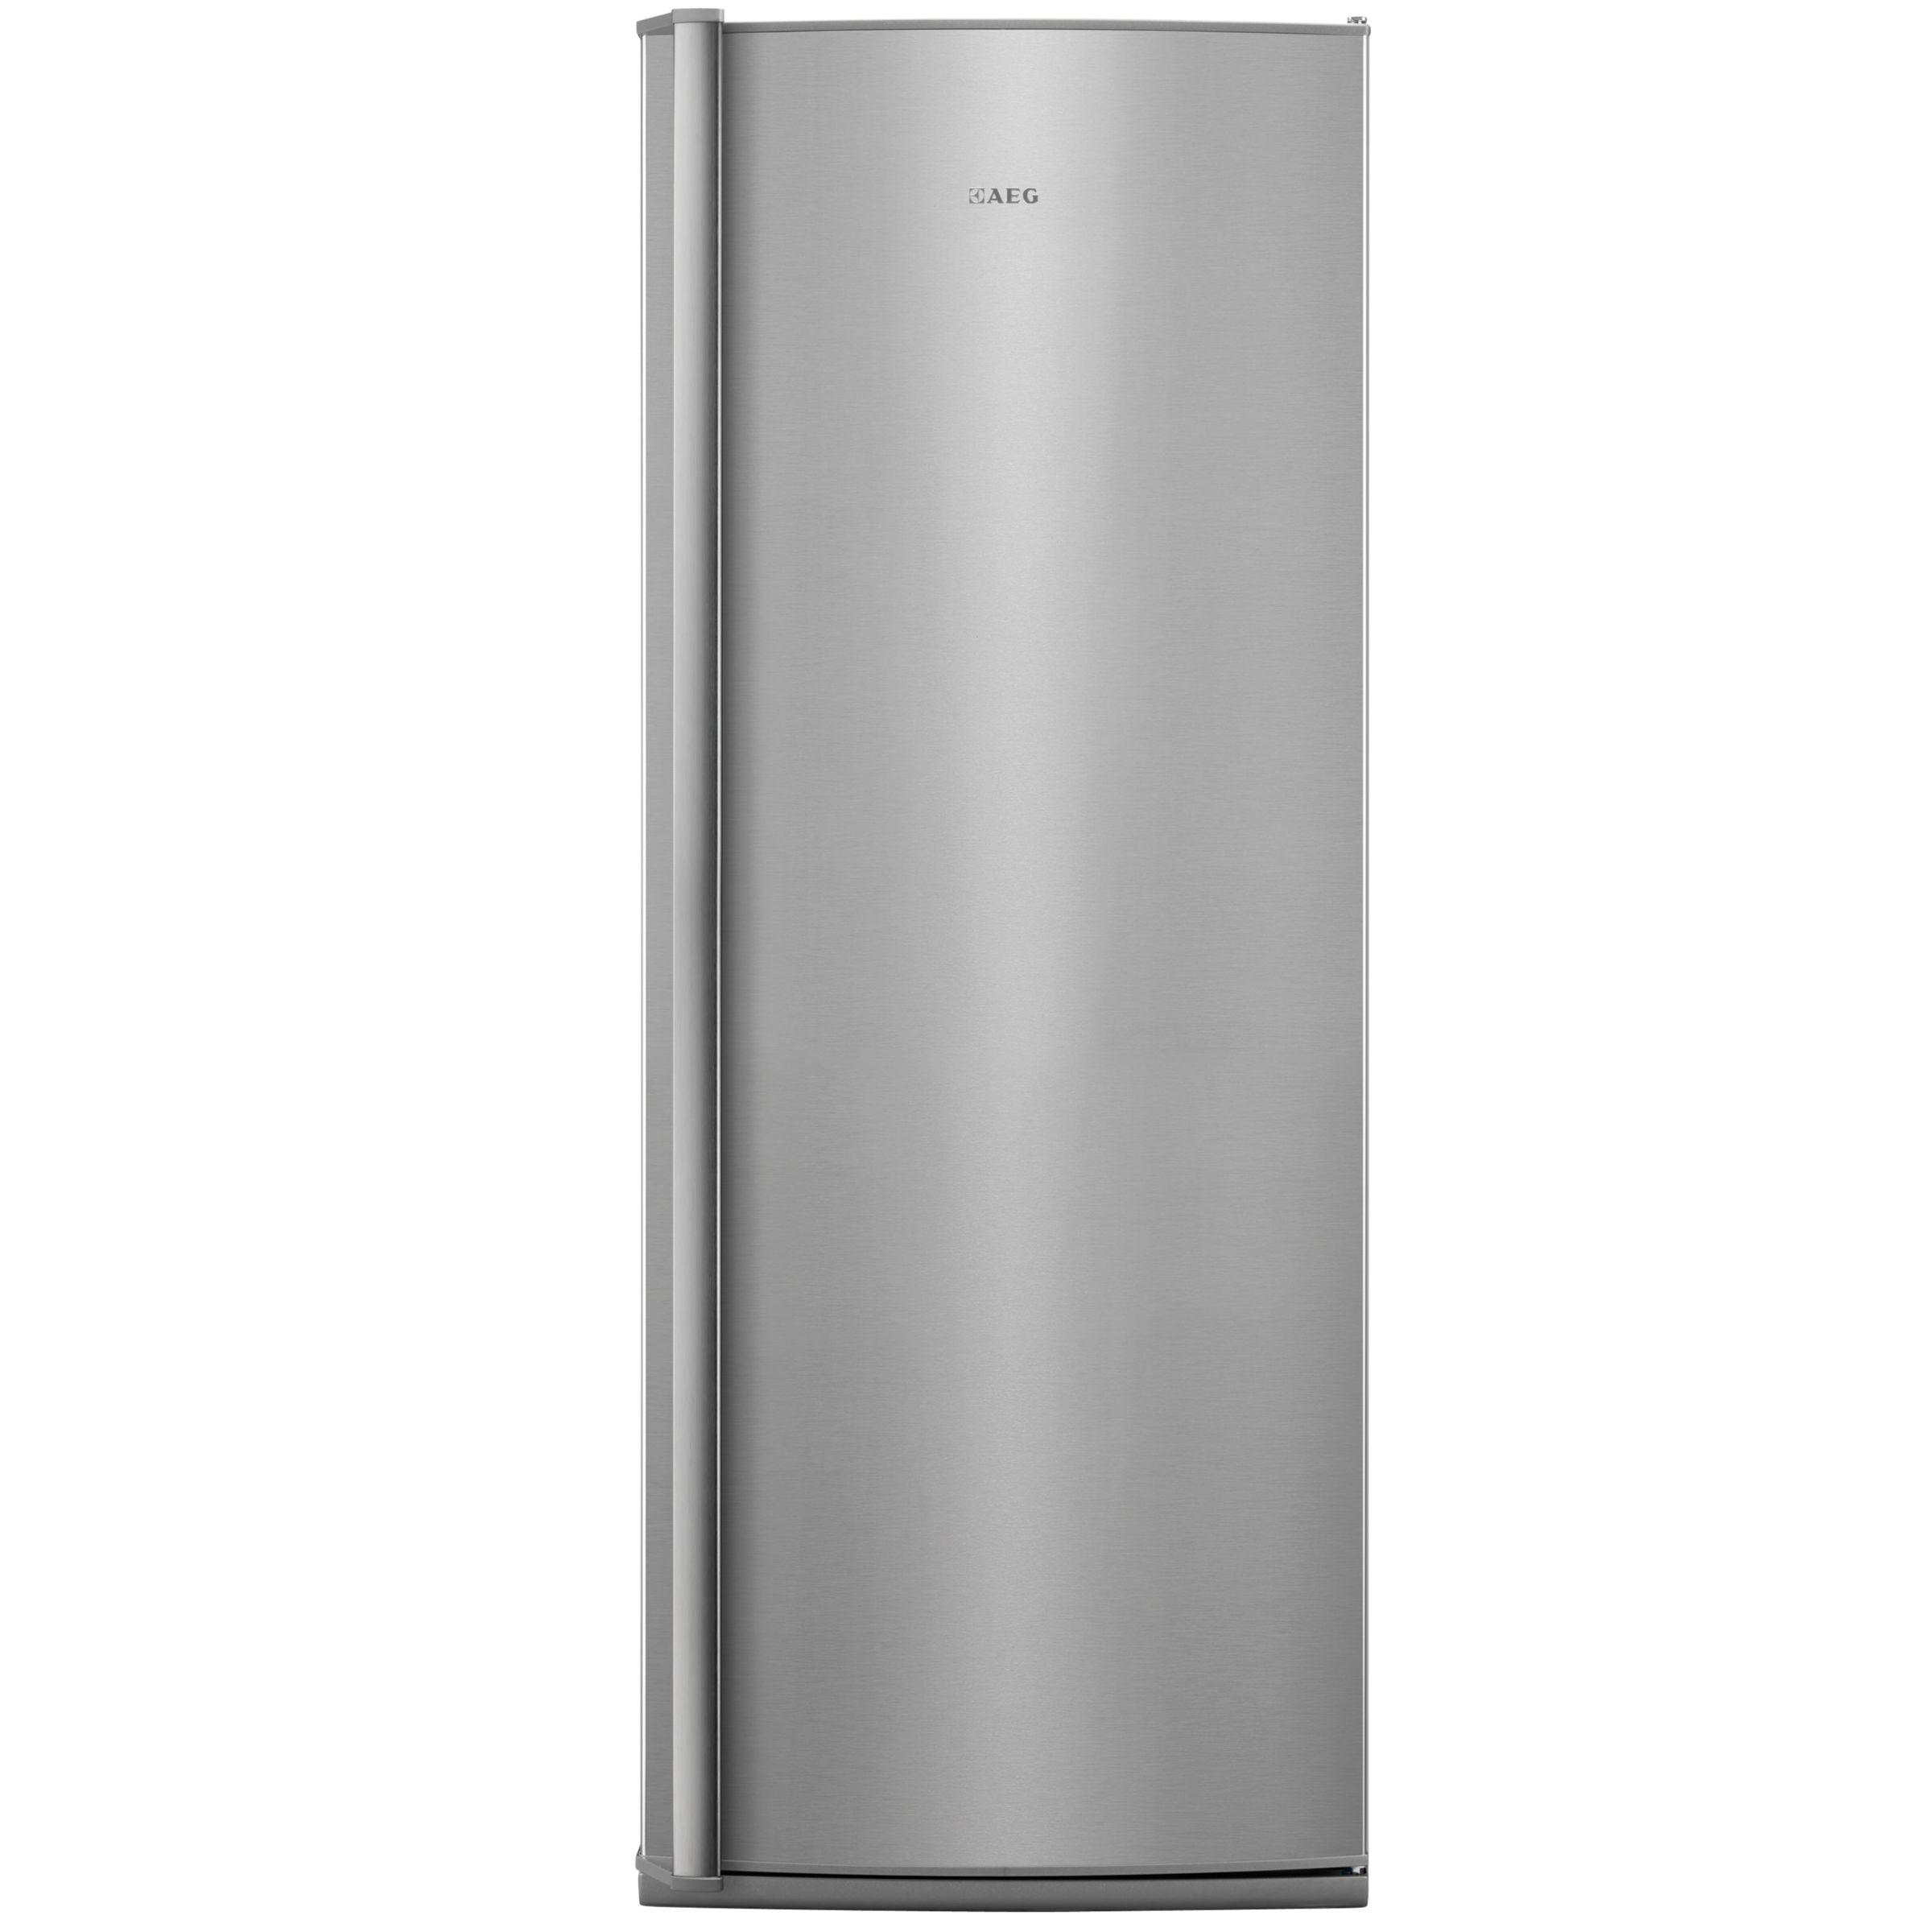 AEG A72020GNW0 Tall Freezer, A++ Energy Rating, 59.5cm Wide